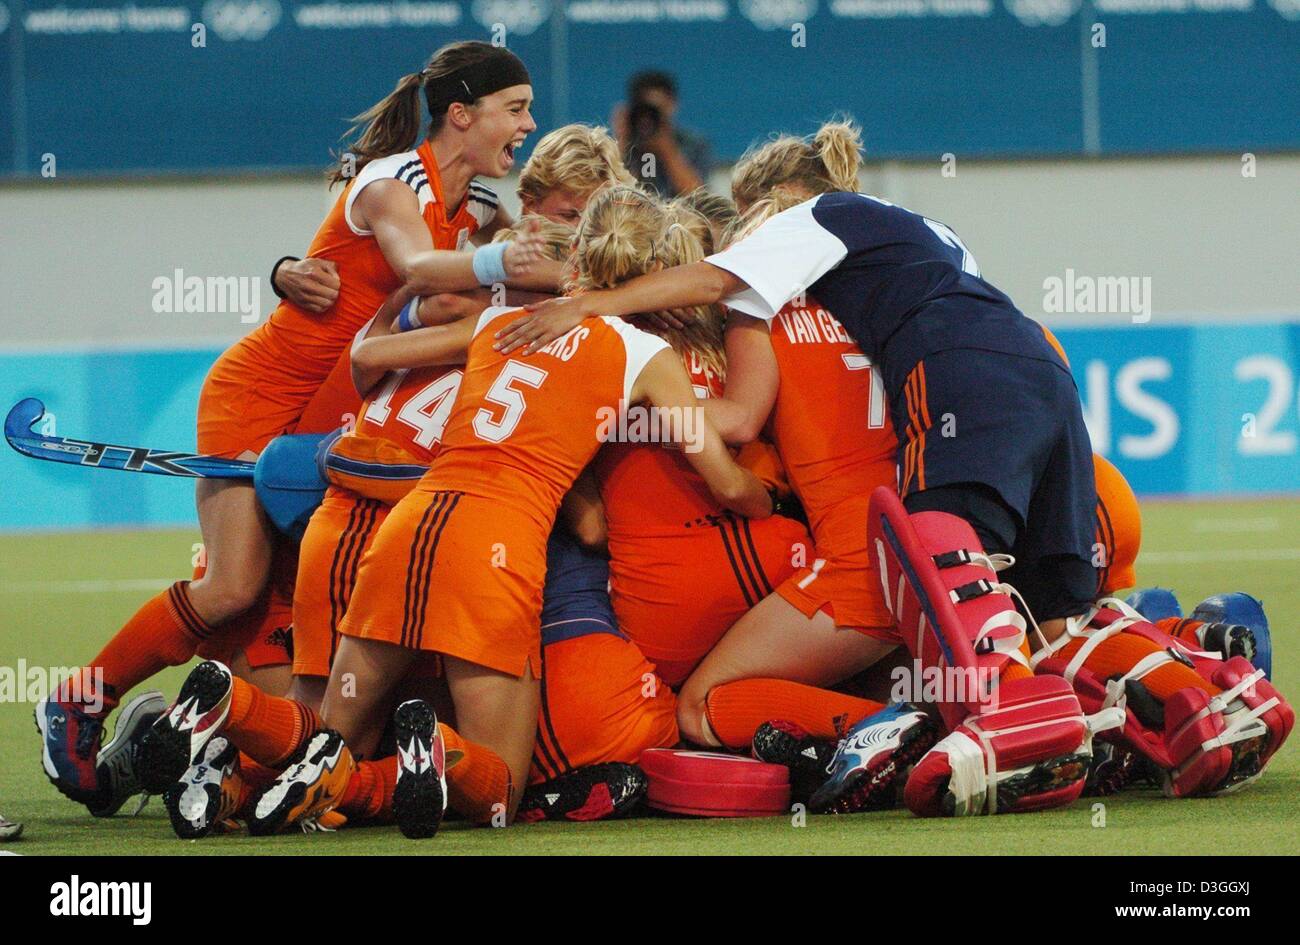 (dpa) - The women's field hockey team from the Netherlands form a pile of celebration after defeating Argentina in the Women's Olympic Field Hockey Tournament's semifinal match in Athens, Greece, 24 August 2004. Stock Photo